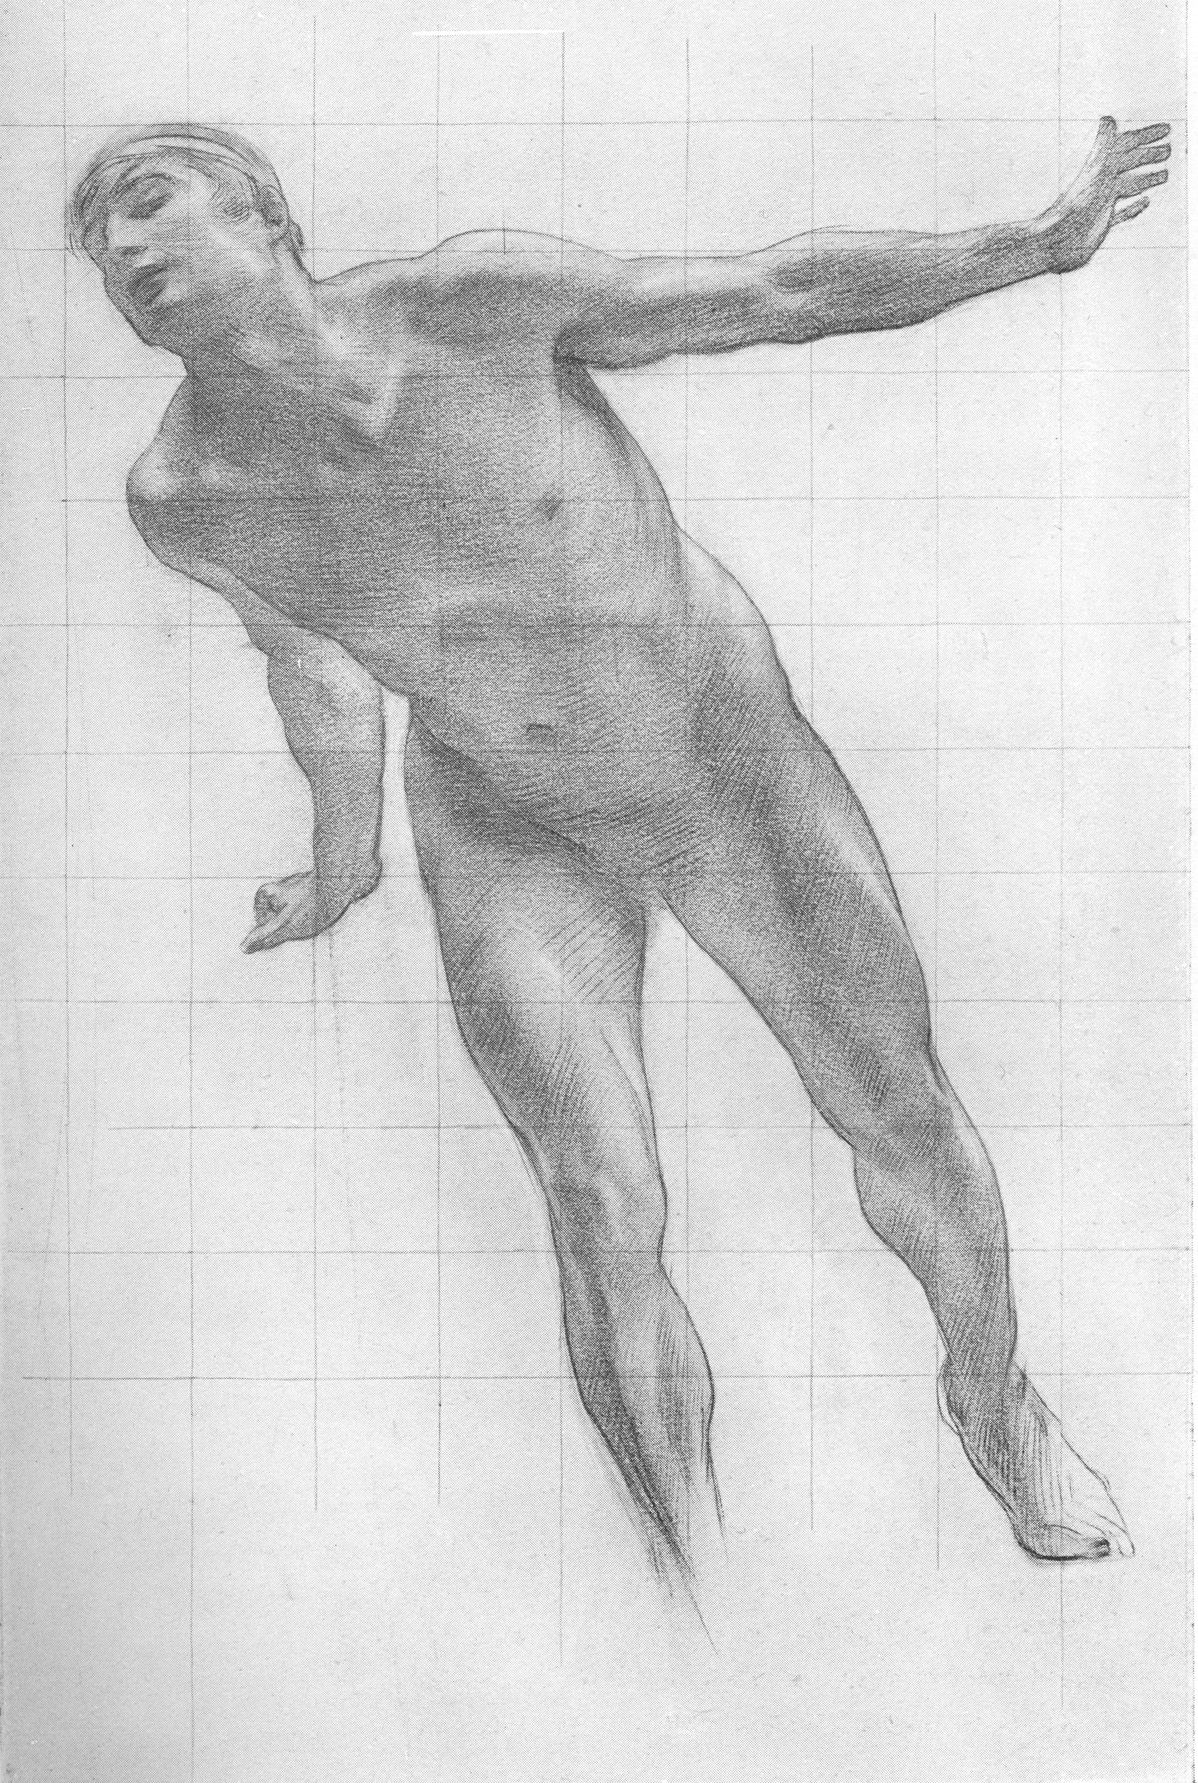 Study for the Figure of Apollo in Apollo and Daphne by Harold Speed-English Painting